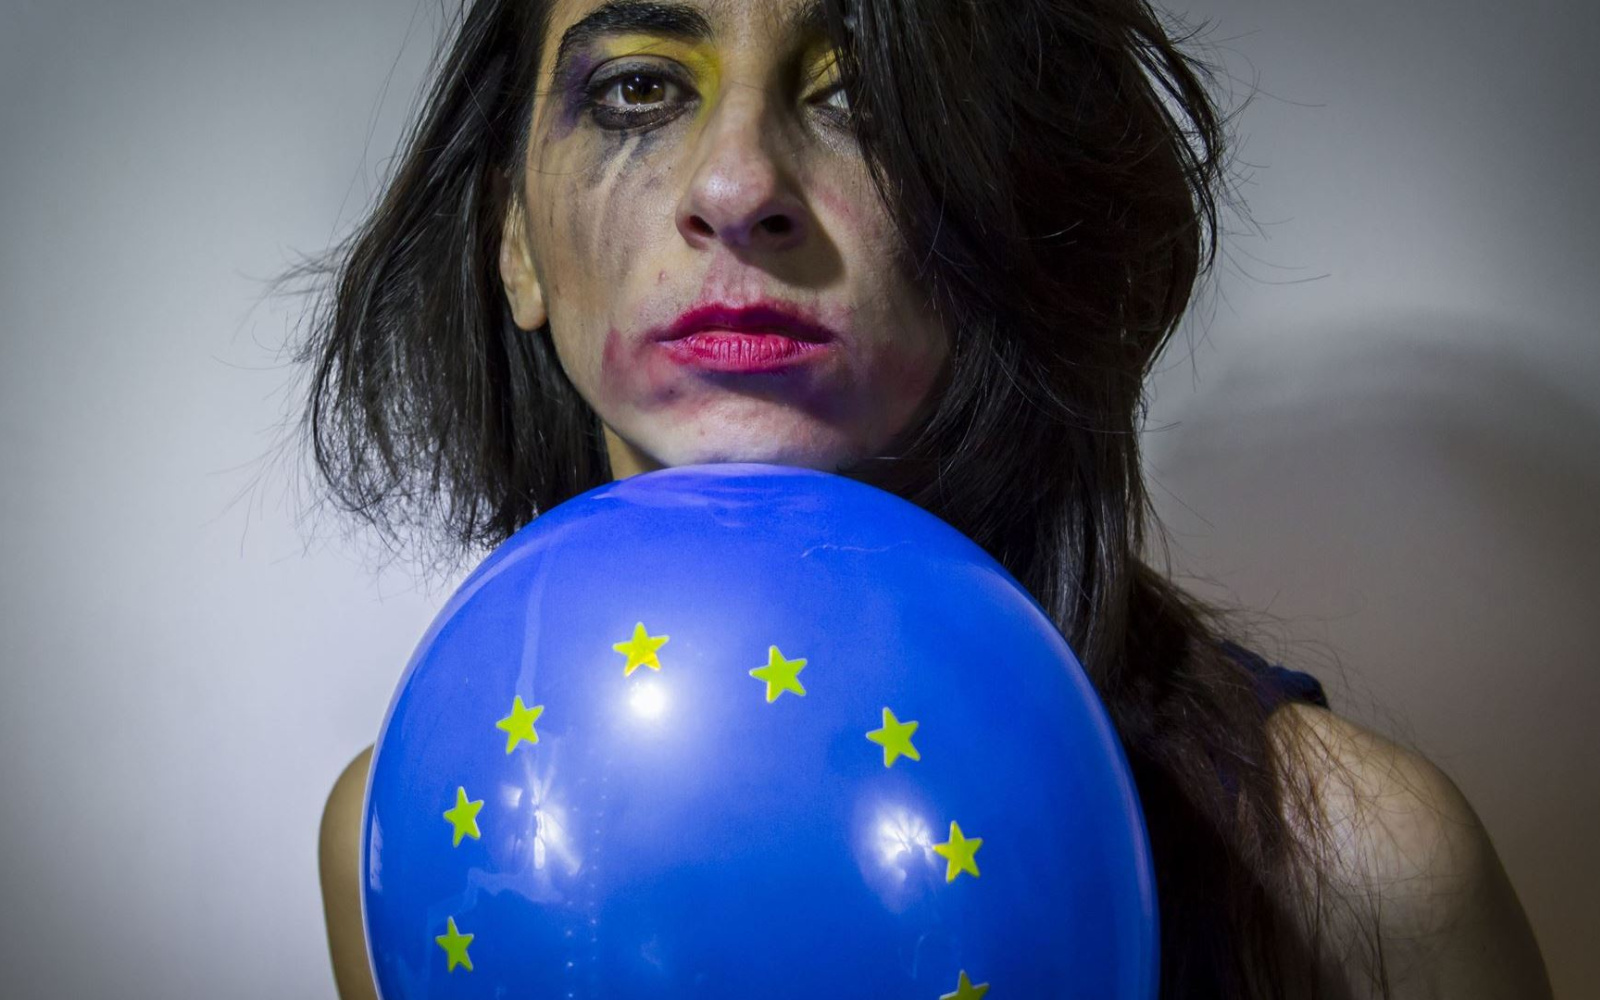 Face of a woman with messed up makeup and a europ ballon